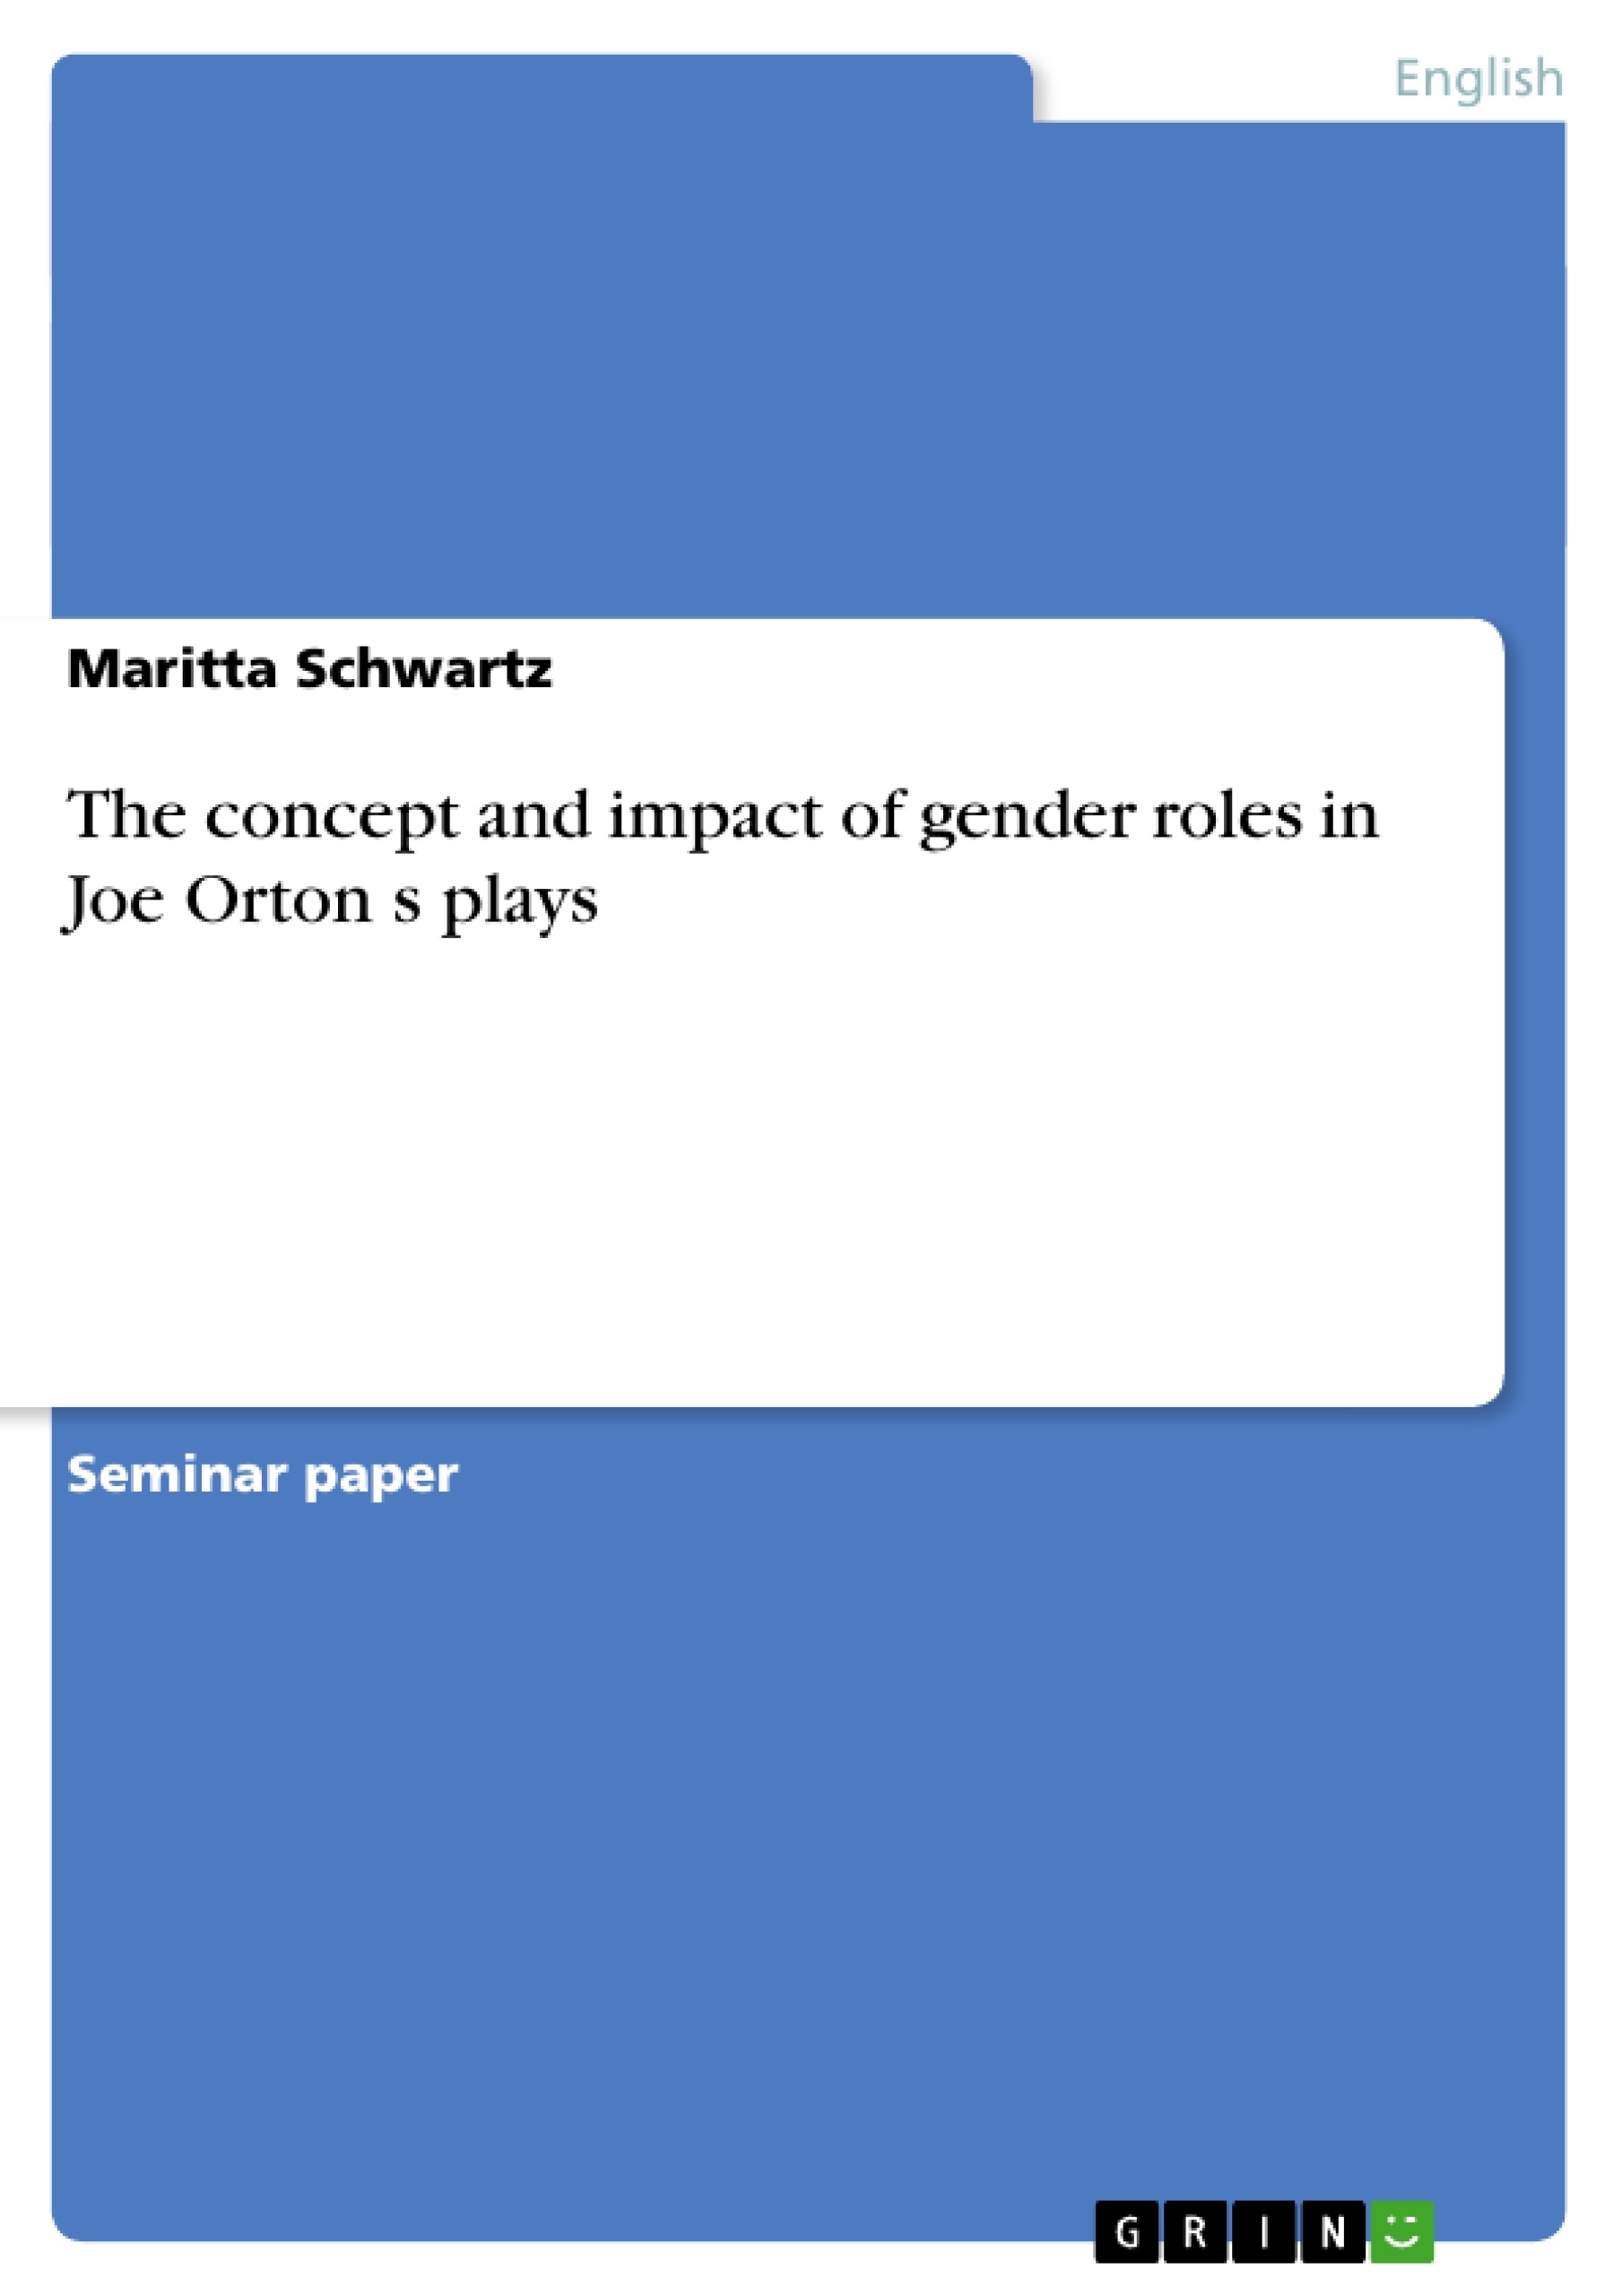 Title: The concept and impact of gender roles in Joe Orton s plays